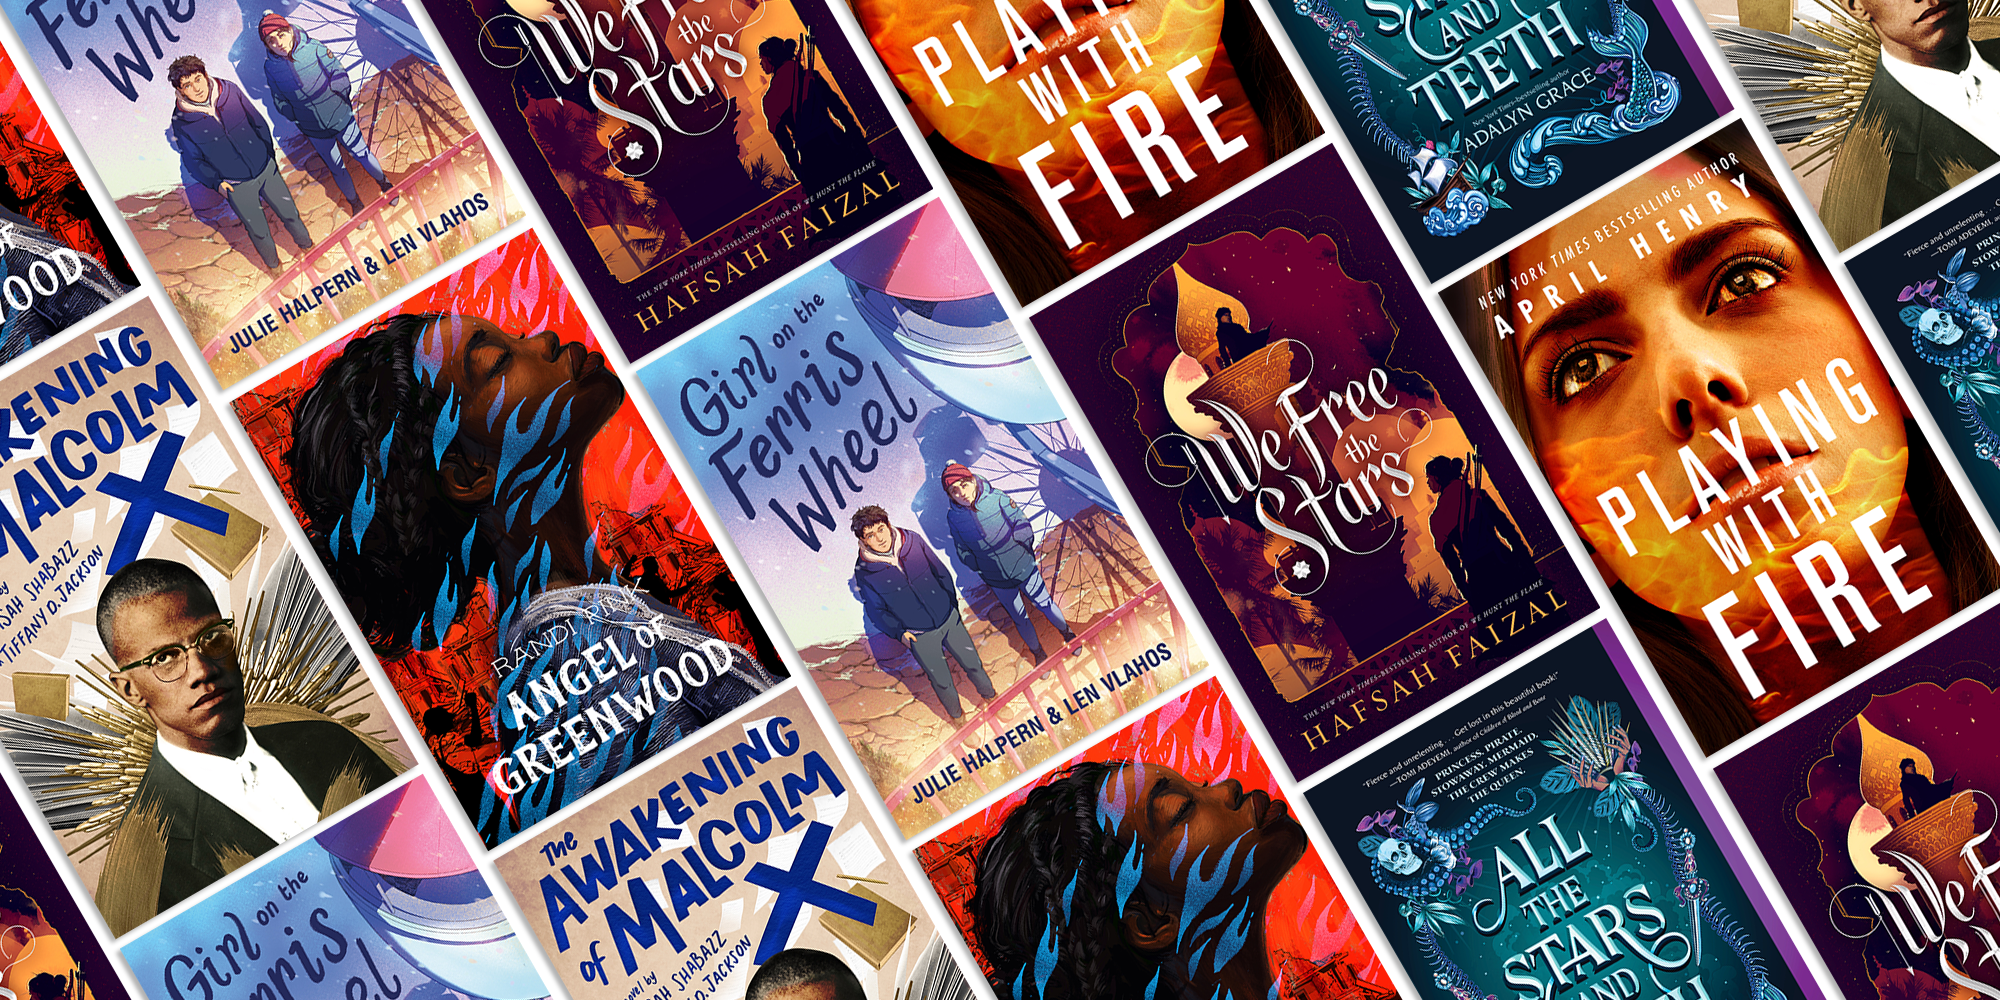 Our 6 Most Anticipated Books of January 2021